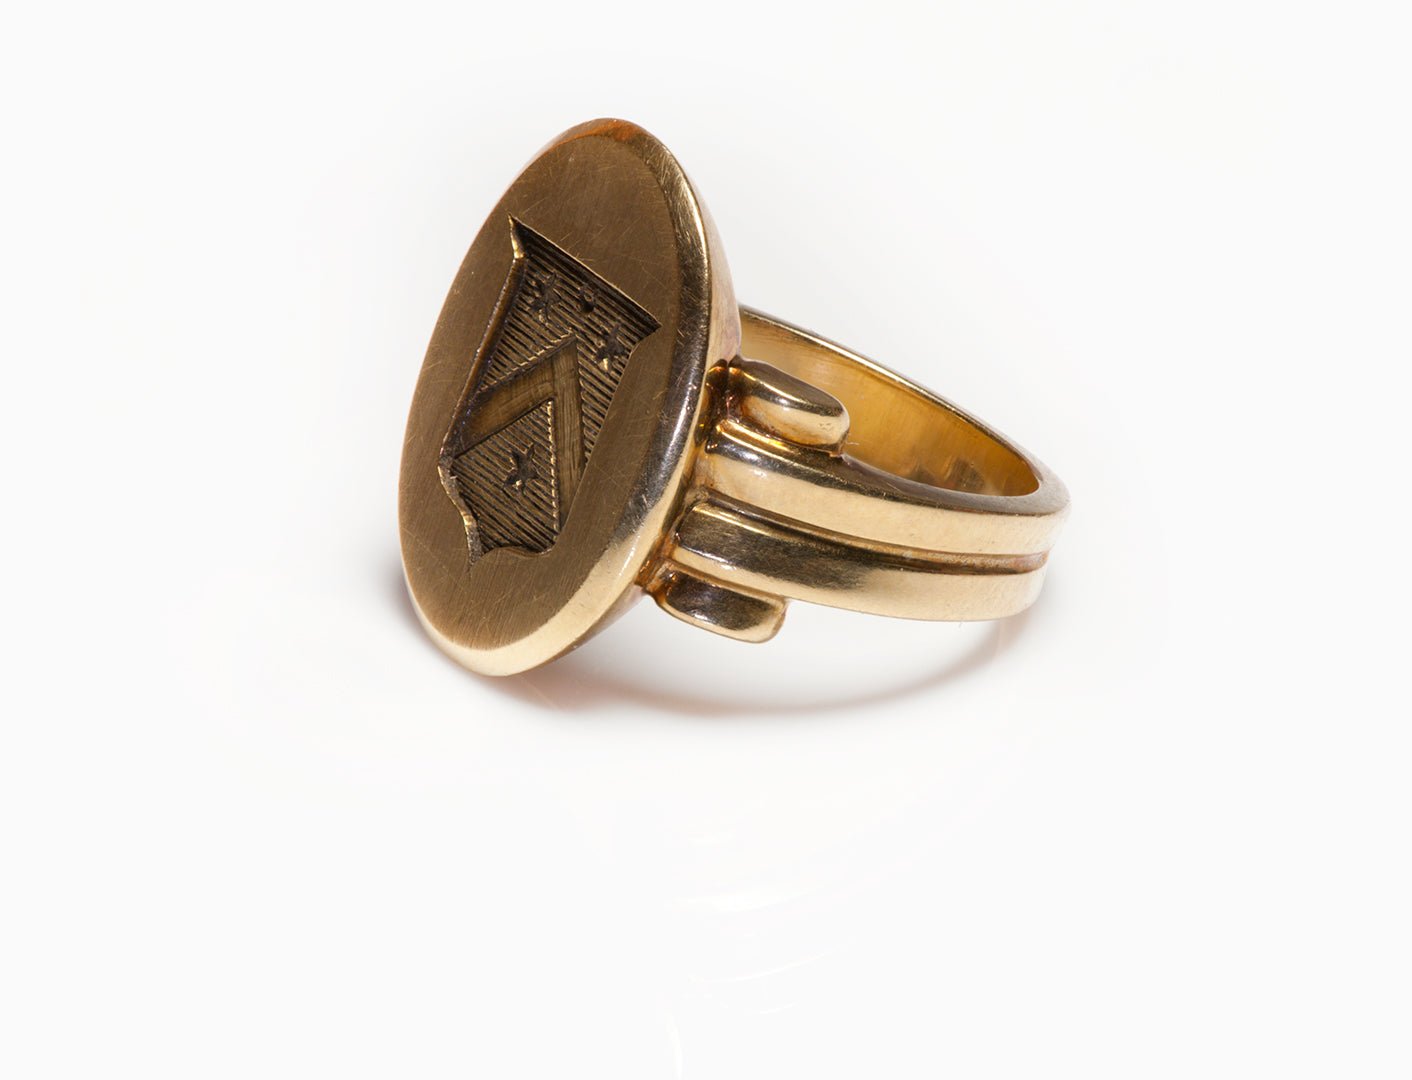 Antique Tiffany & Co. Gold Crest Men's Ring - DSF Antique Jewelry